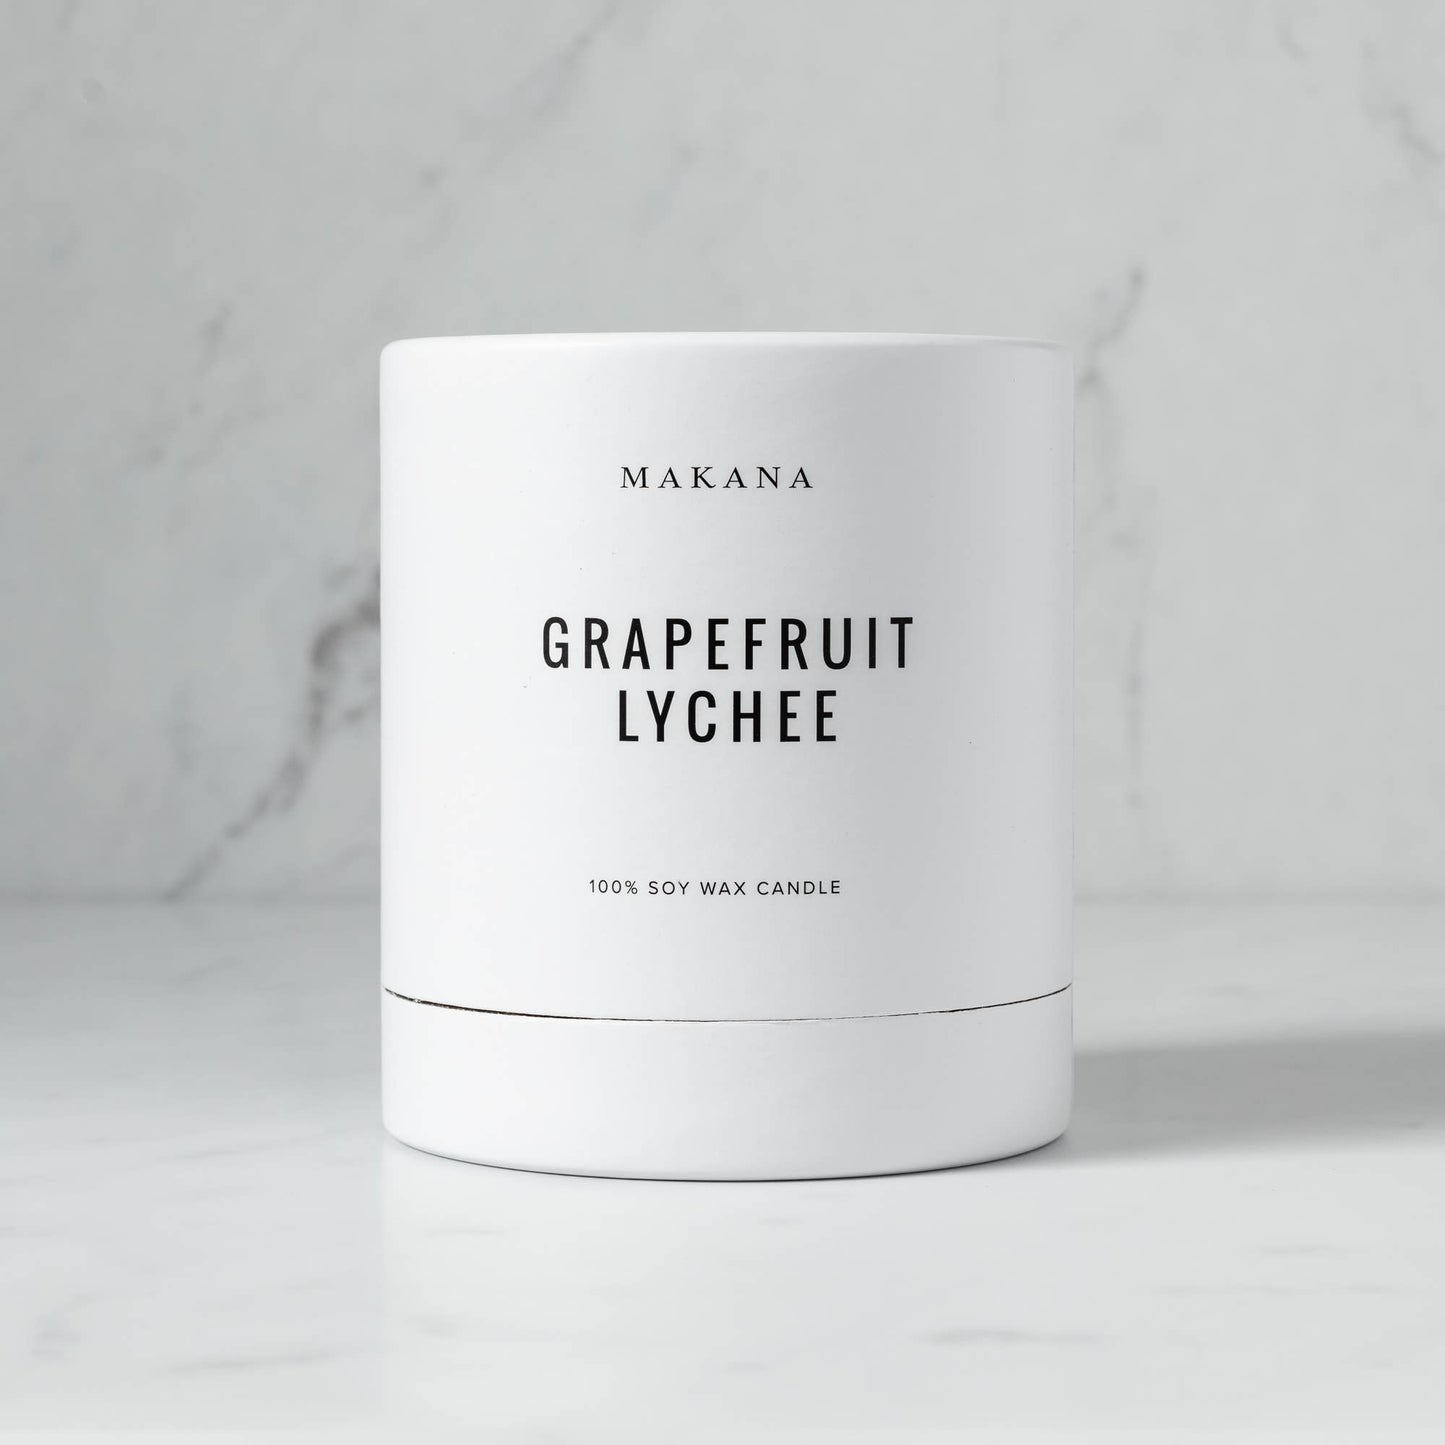 Grapefruit Lychee - Classic Candle 10 oz - Curated Home Decor